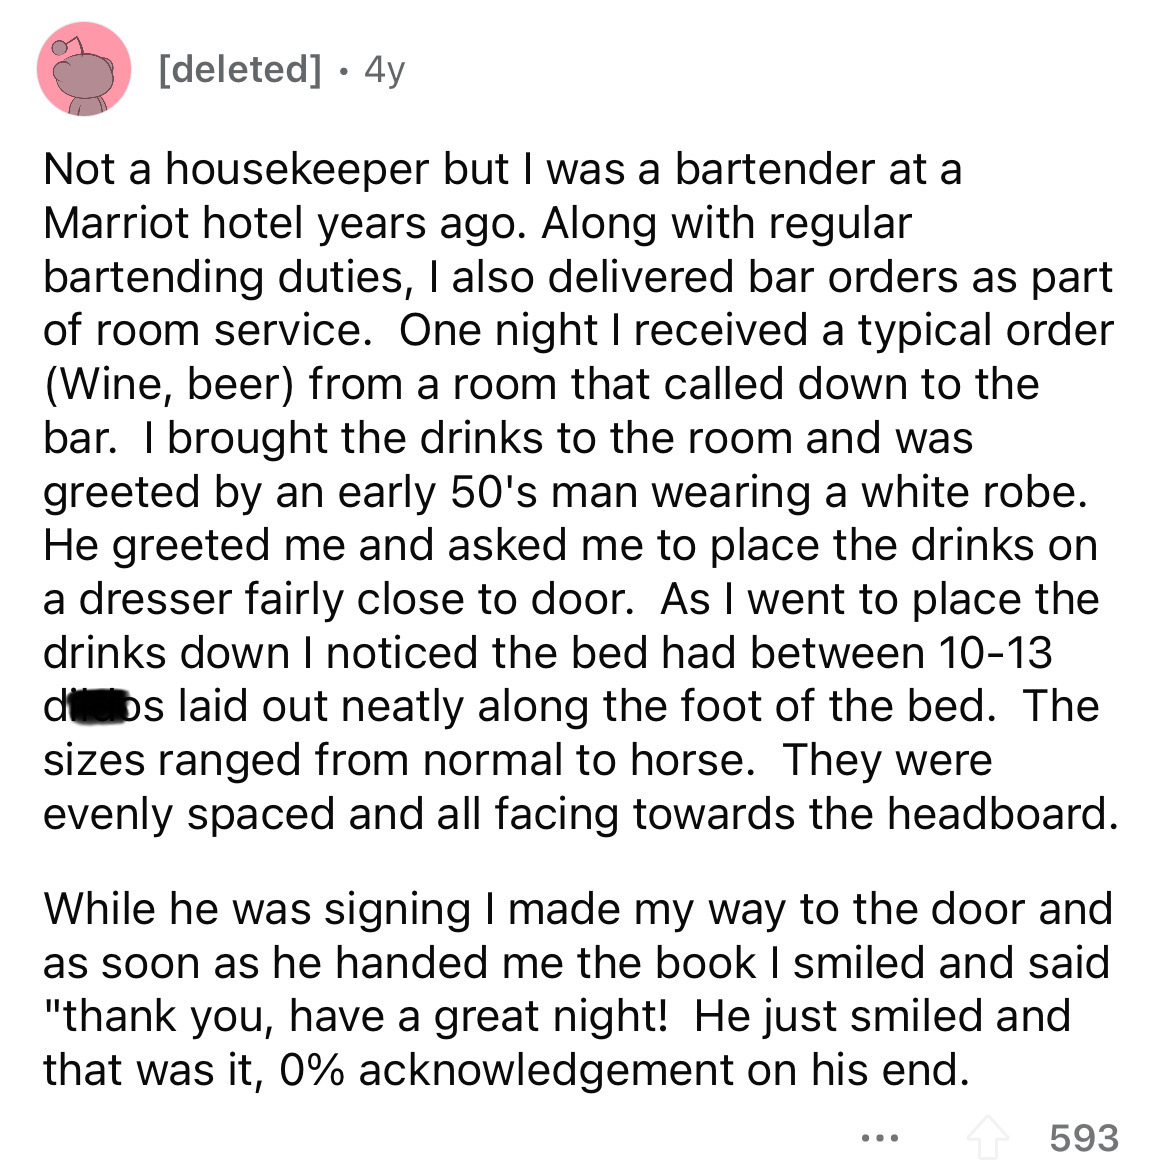 angle - deleted 4y Not a housekeeper but I was a bartender at a Marriot hotel years ago. Along with regular bartending duties, I also delivered bar orders as part of room service. One night I received a typical order Wine, beer from a room that called dow